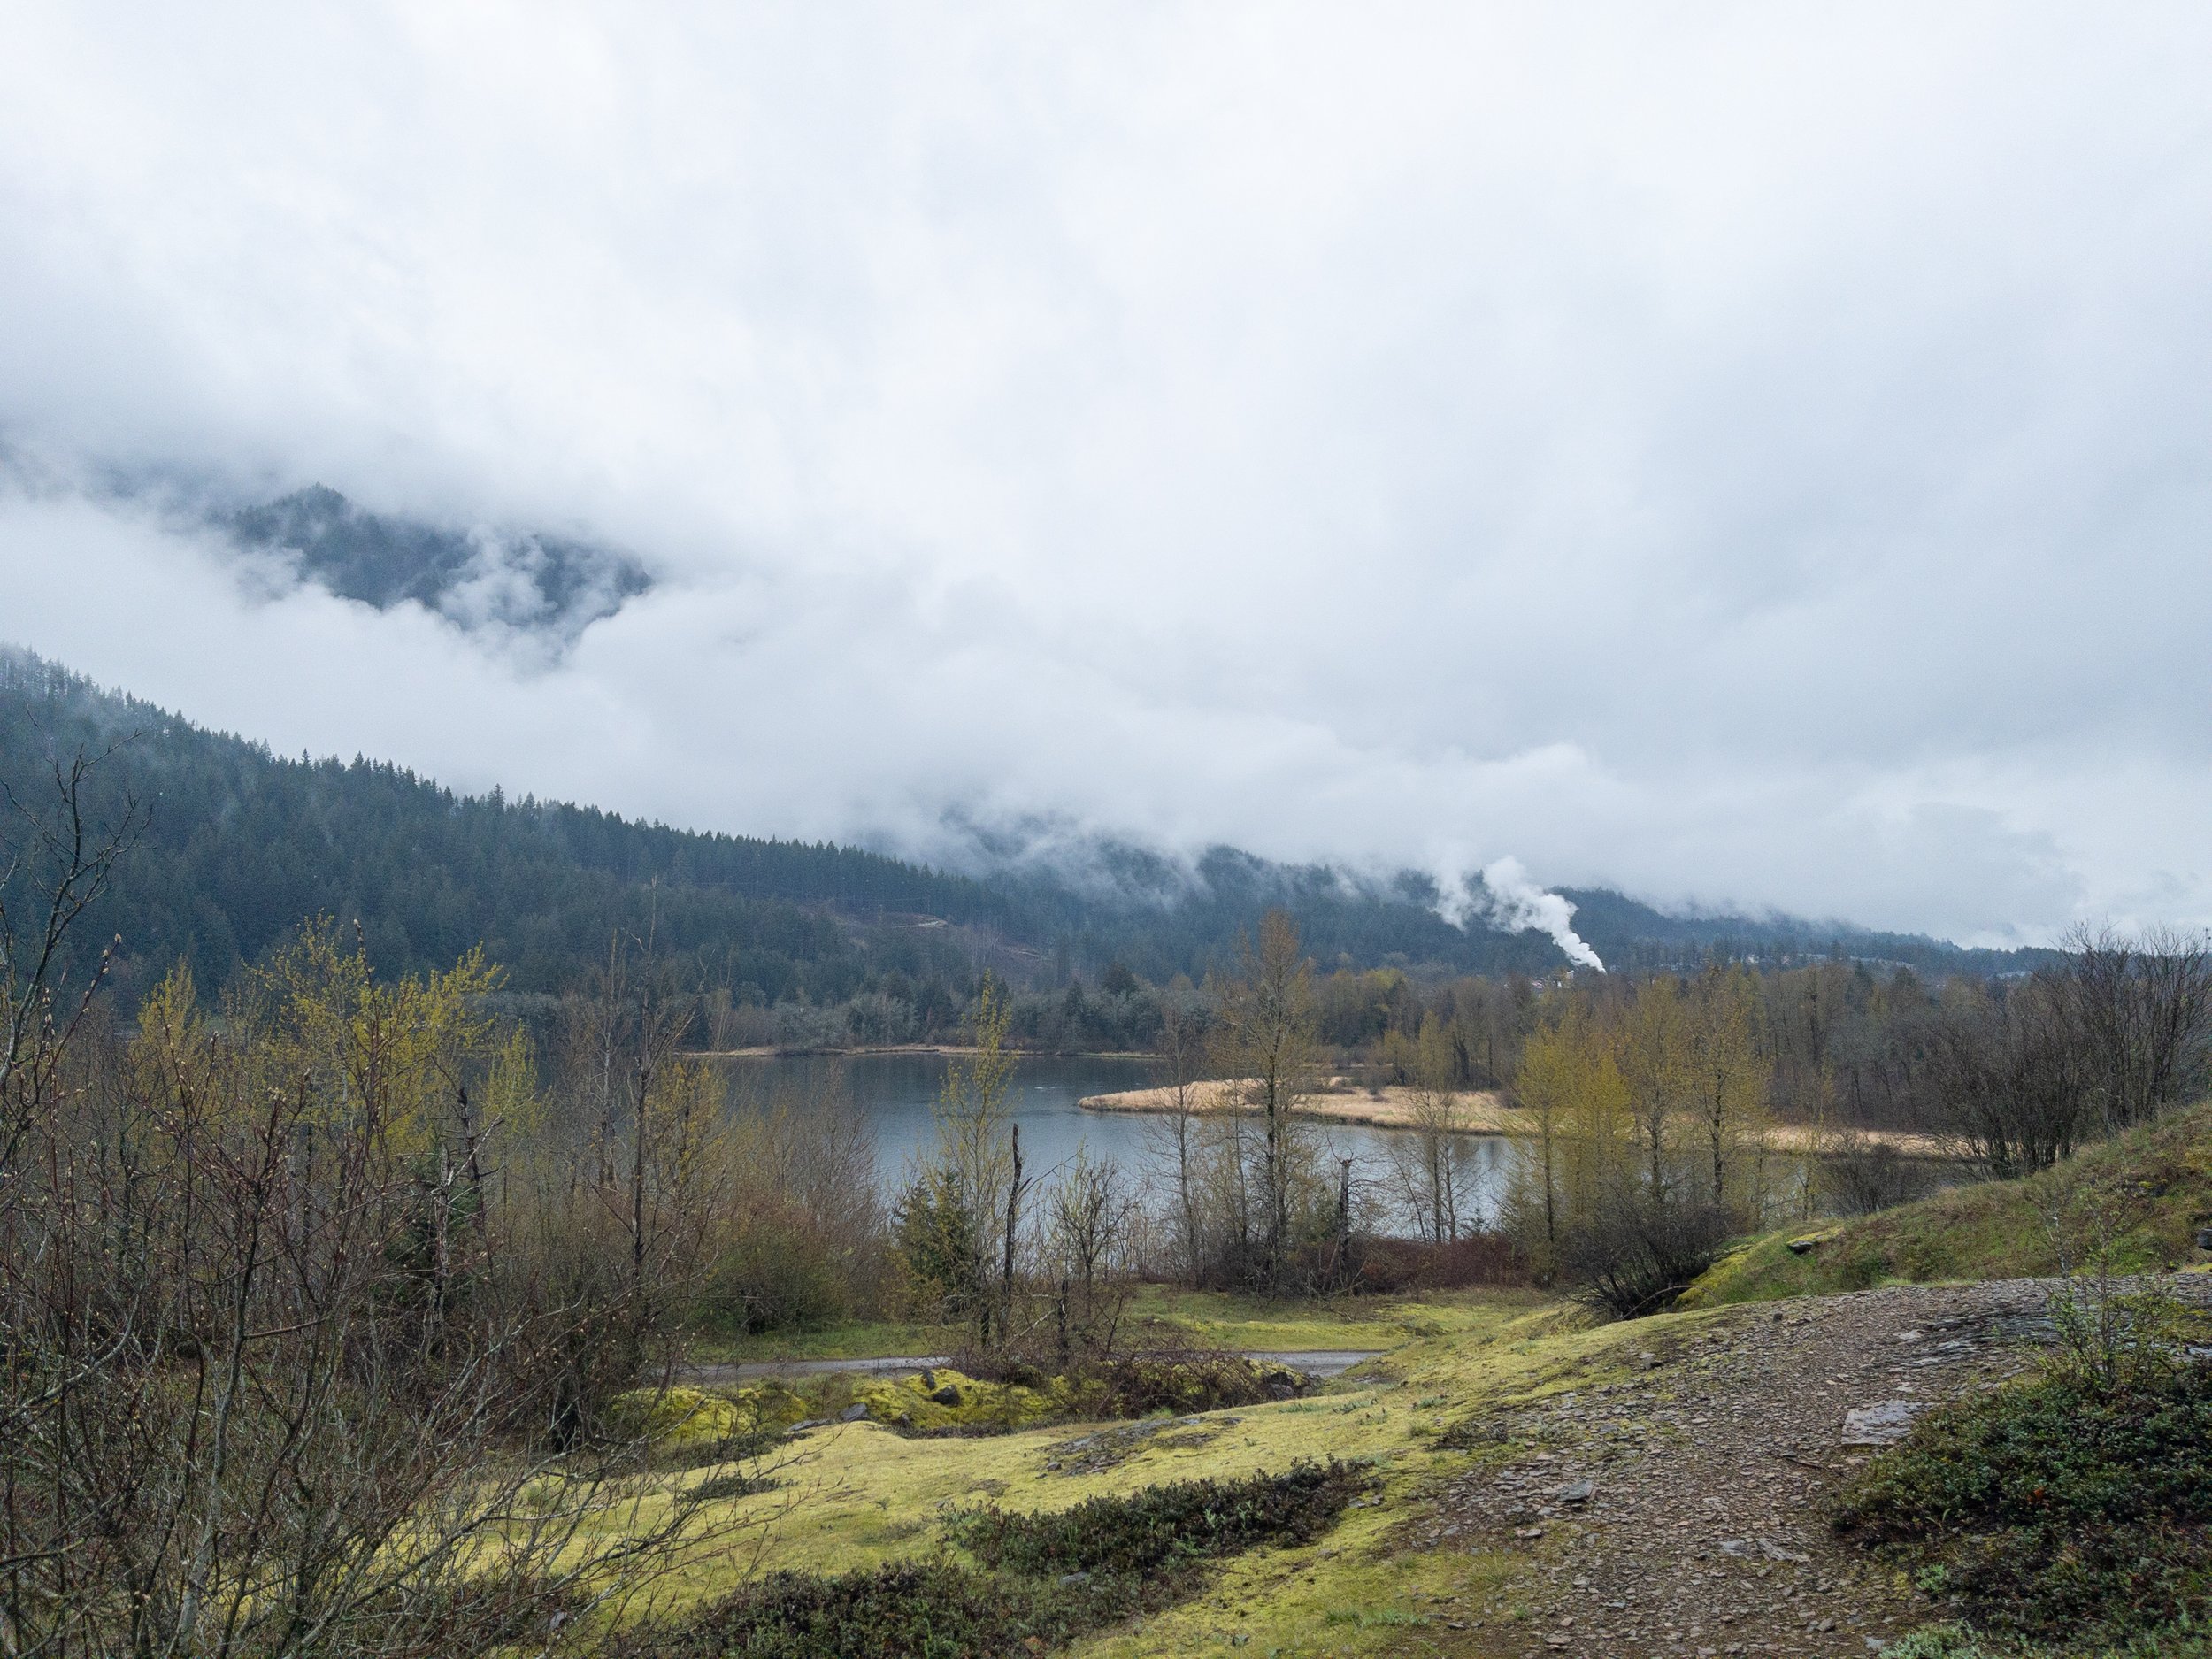 Fog rolling over mountains with a lake at its base in Columbia River Gorge